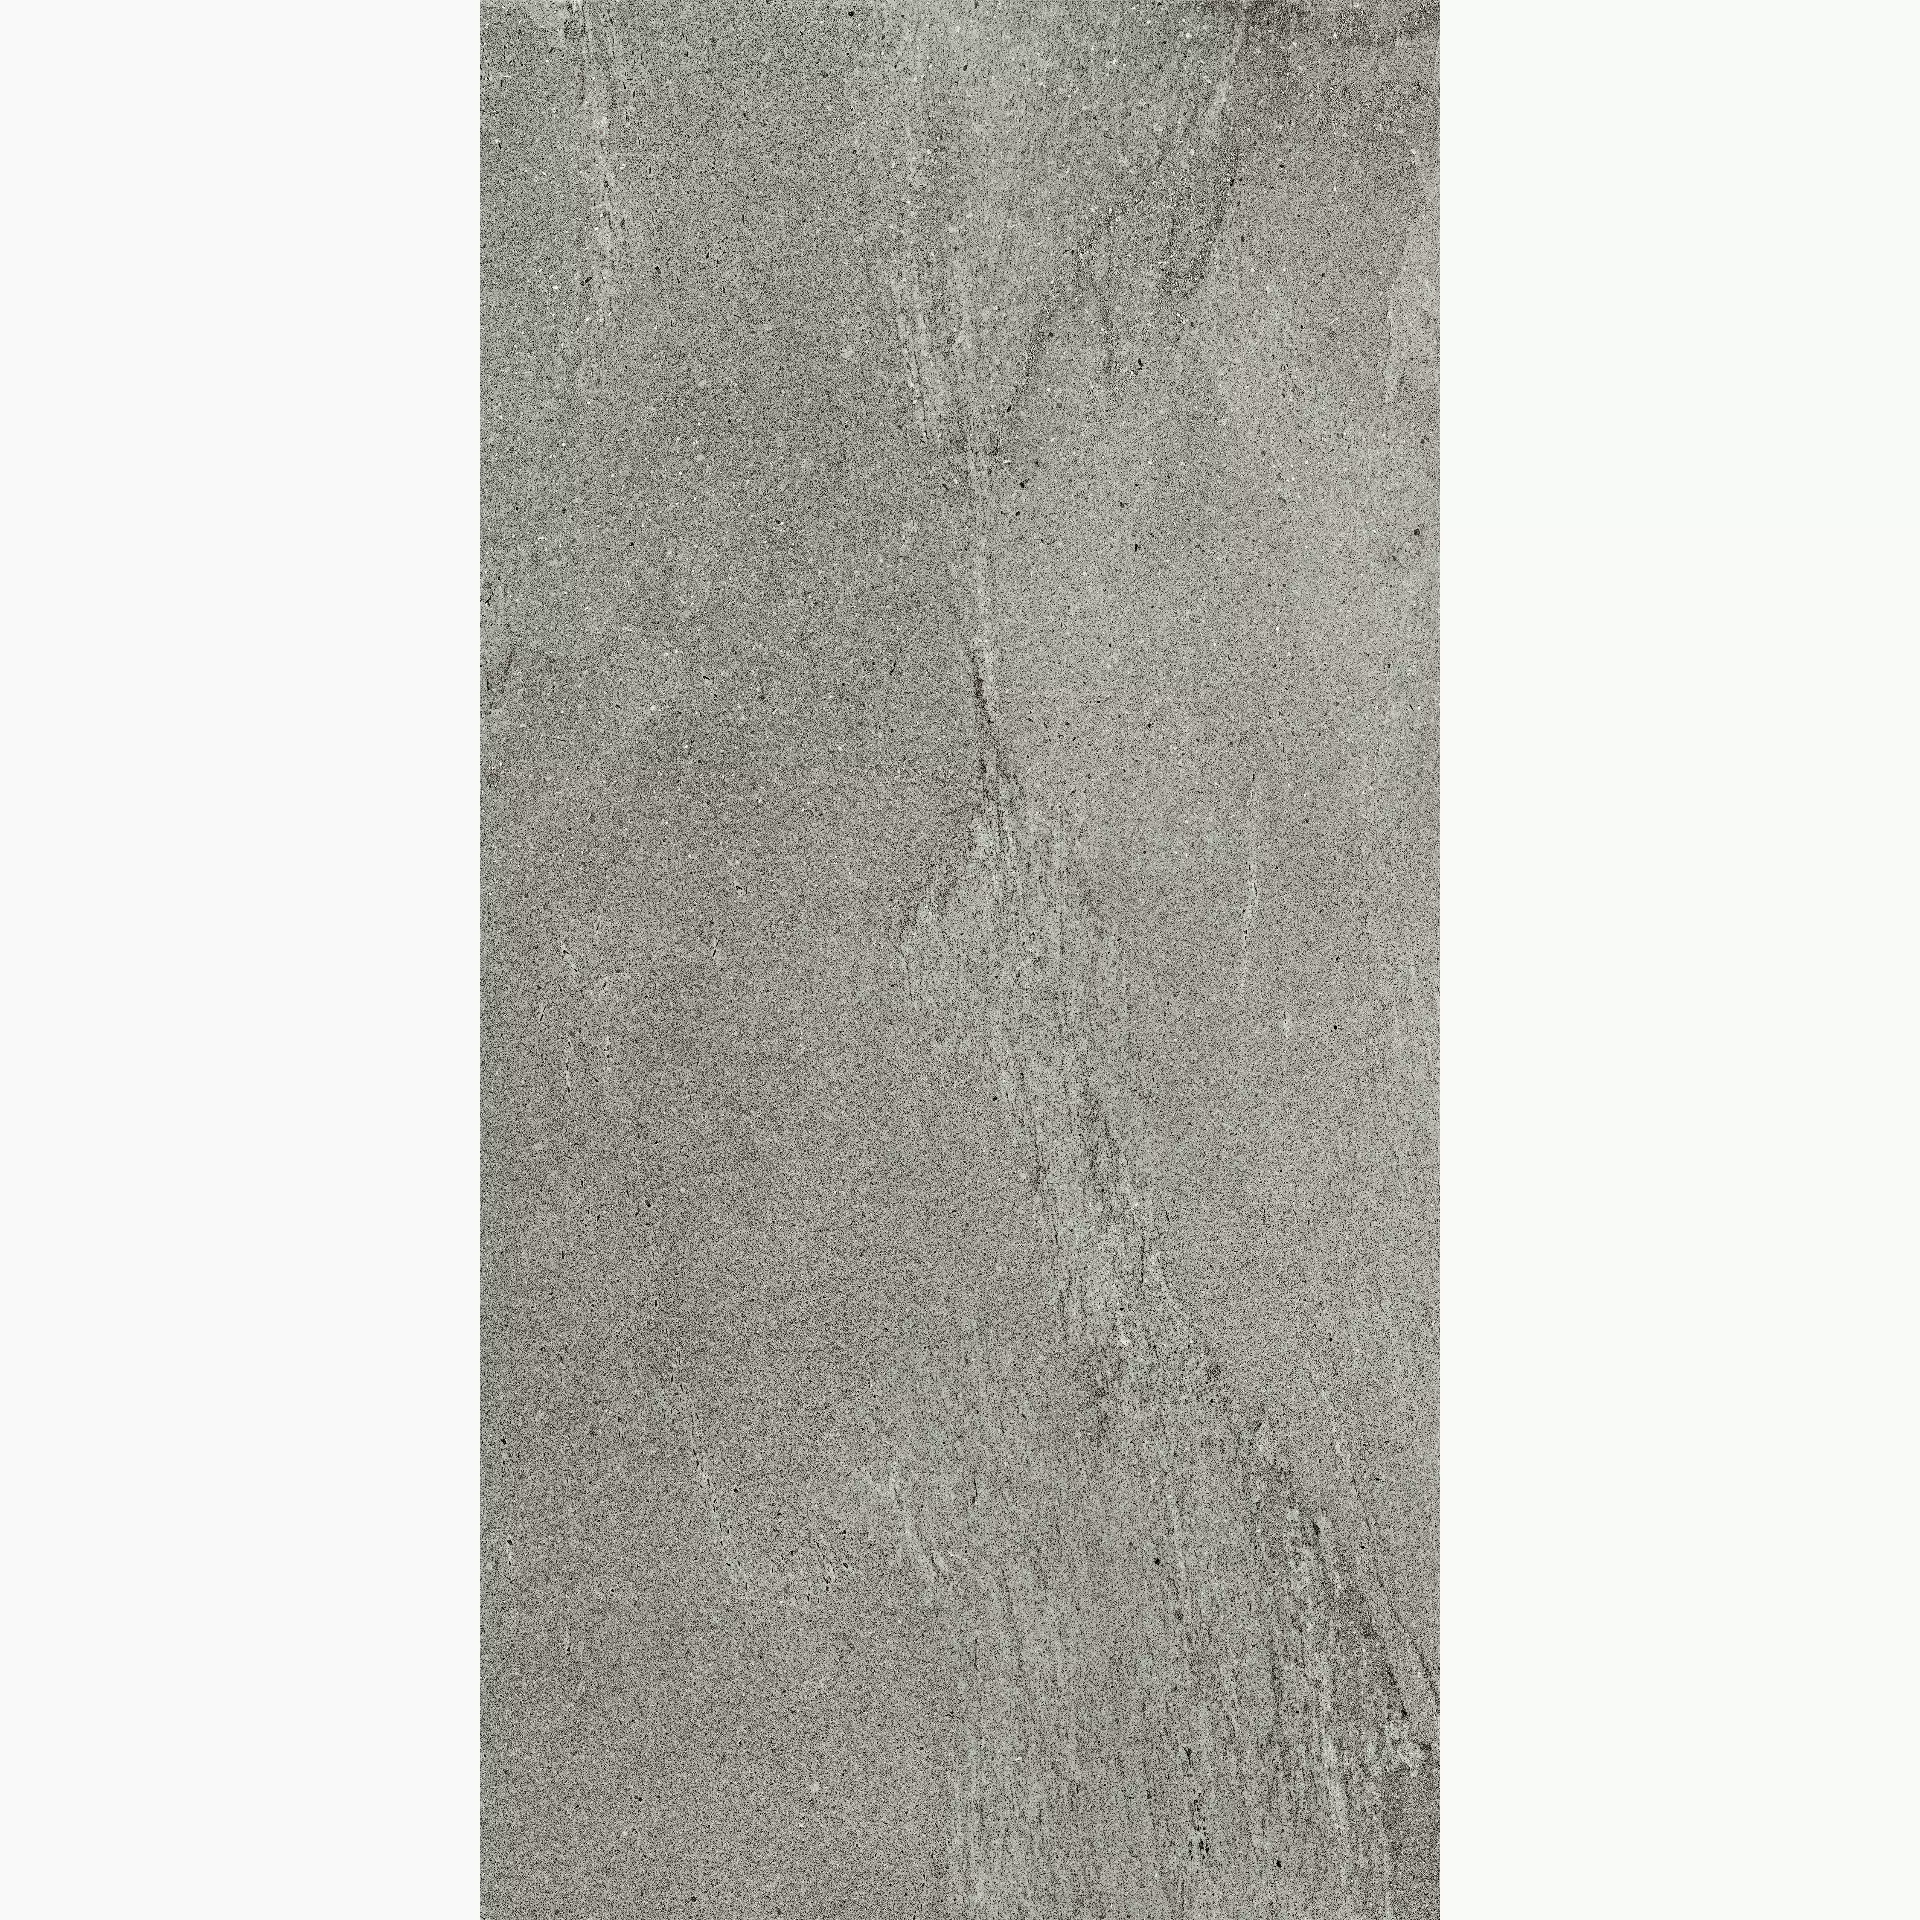 Cottodeste Blend Stone Mid Naturale Protect EGEBS30 90x180cm rectified 14mm